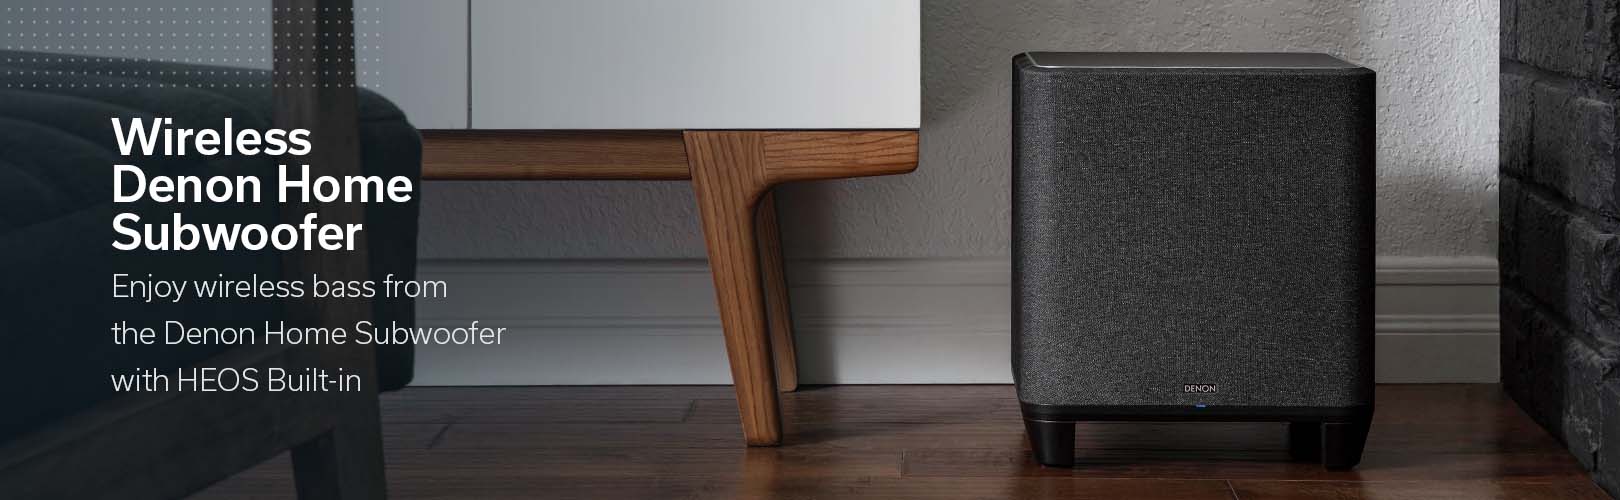 Wireless Denon Home Subwoofer with HEOS Built-in